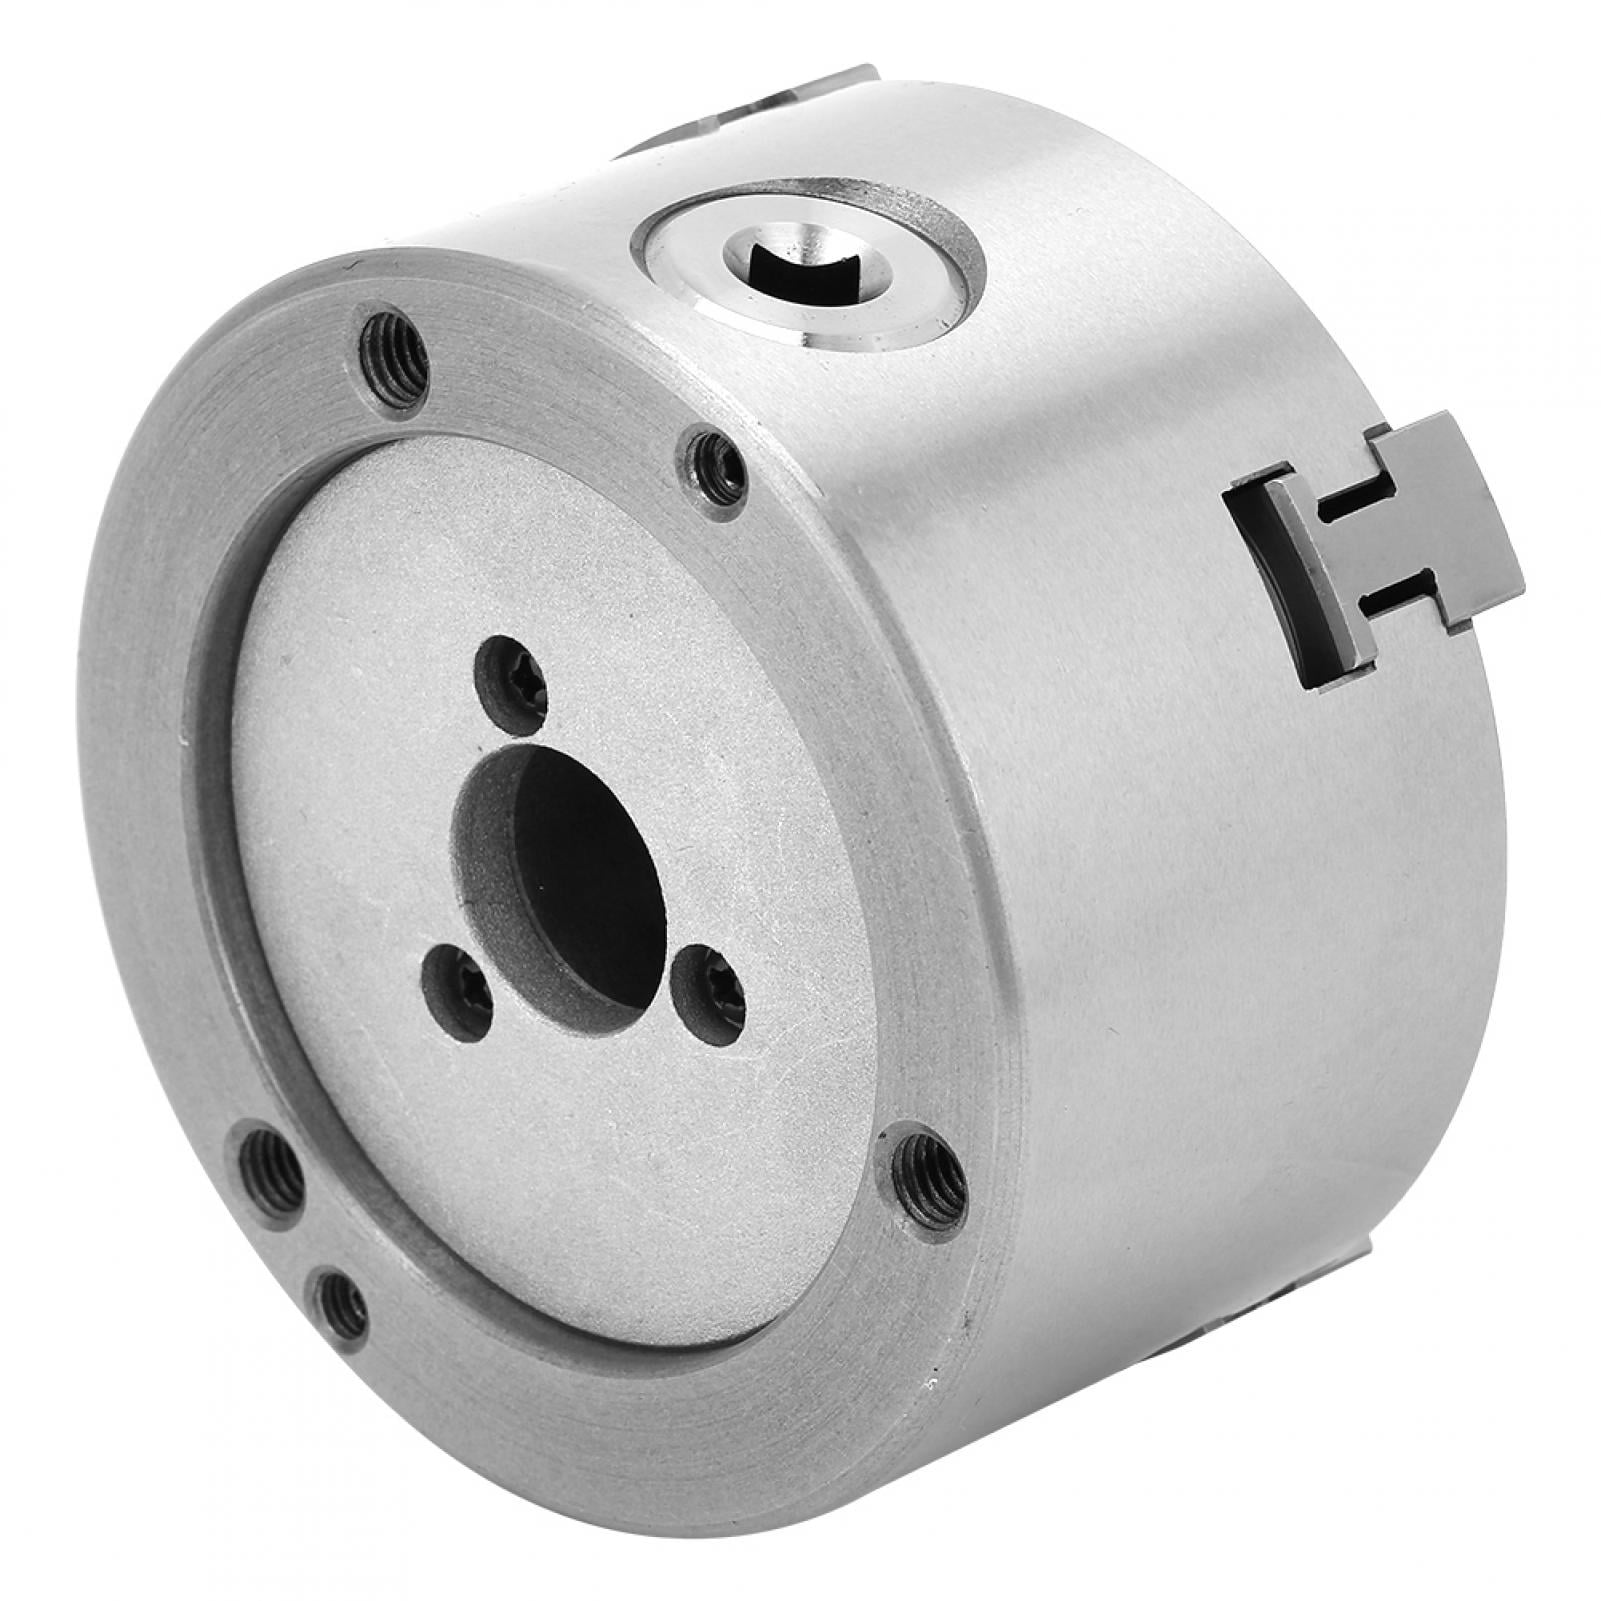 100mm 4 Jaw Self-Centering Lathe Chuck with Extra Jaws Turning Machine Accessories